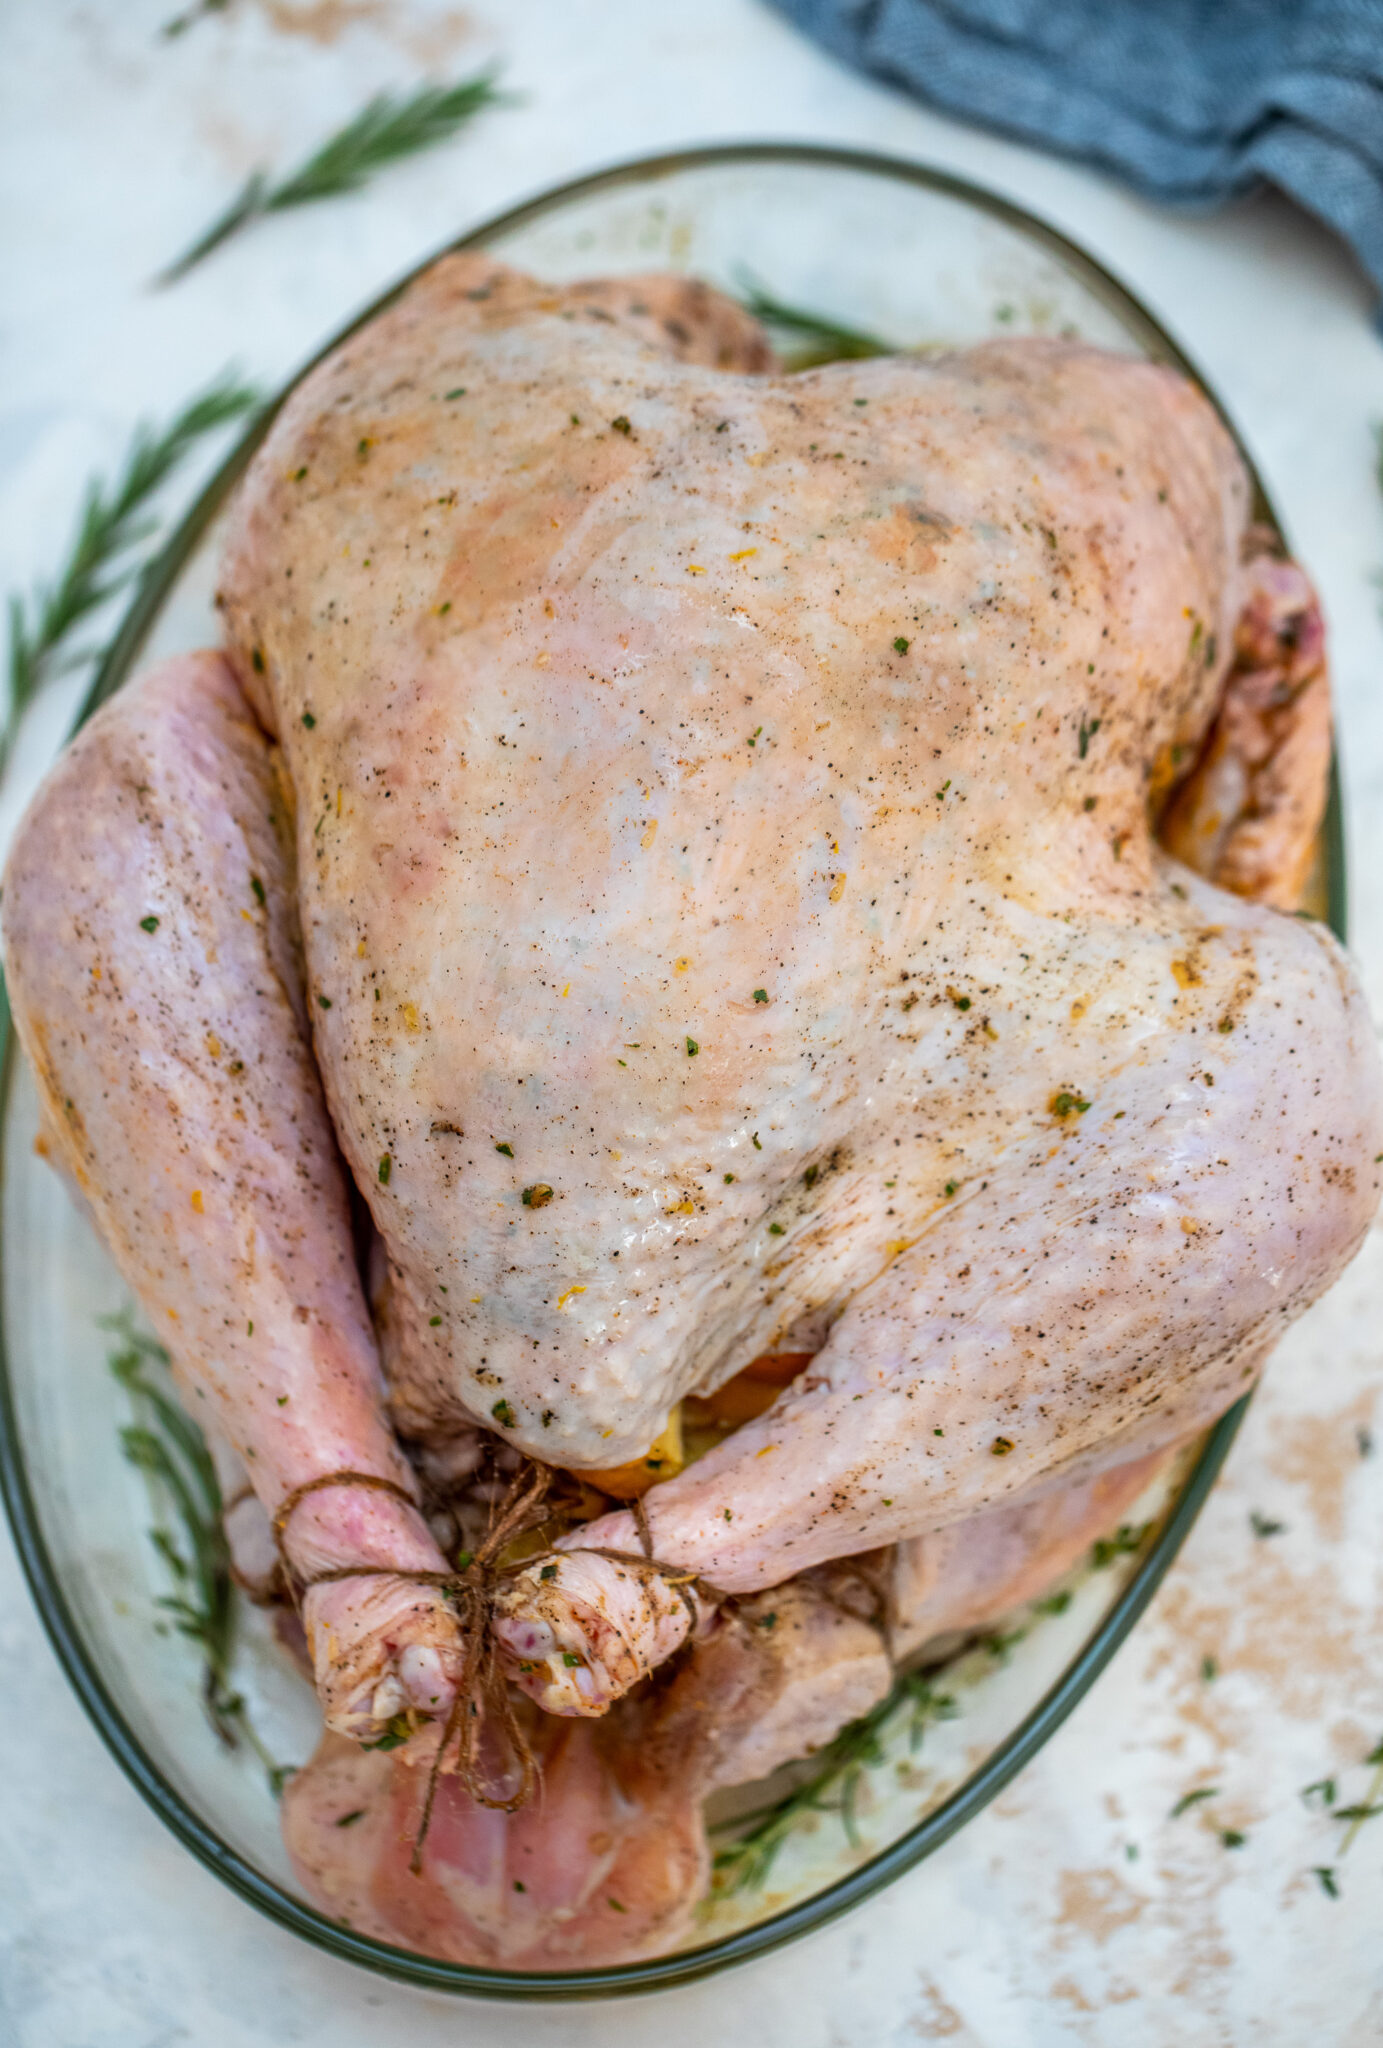 Oven Roasted Turkey Recipe [VIDEO] - Sweet and Savory Meals